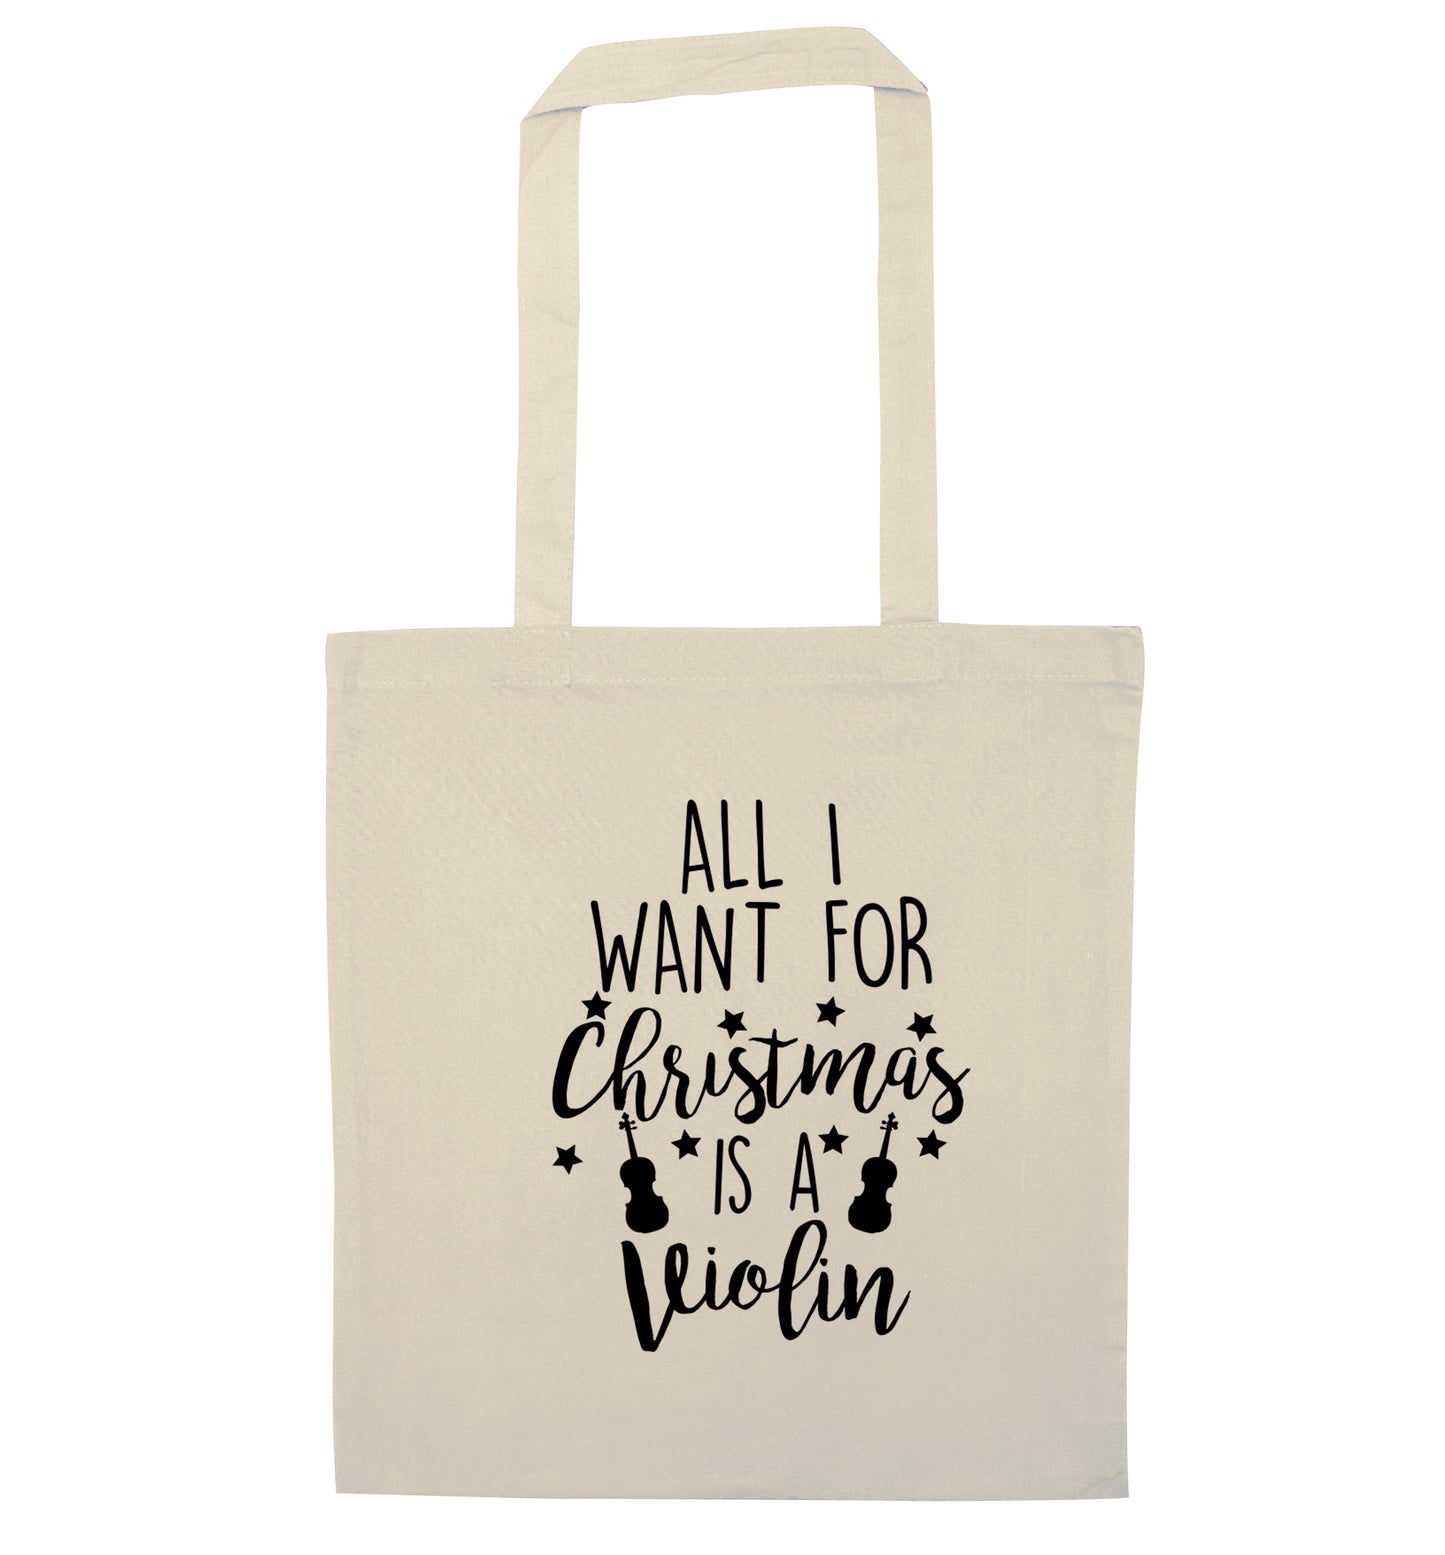 All I Want For Christmas is a Violin natural tote bag